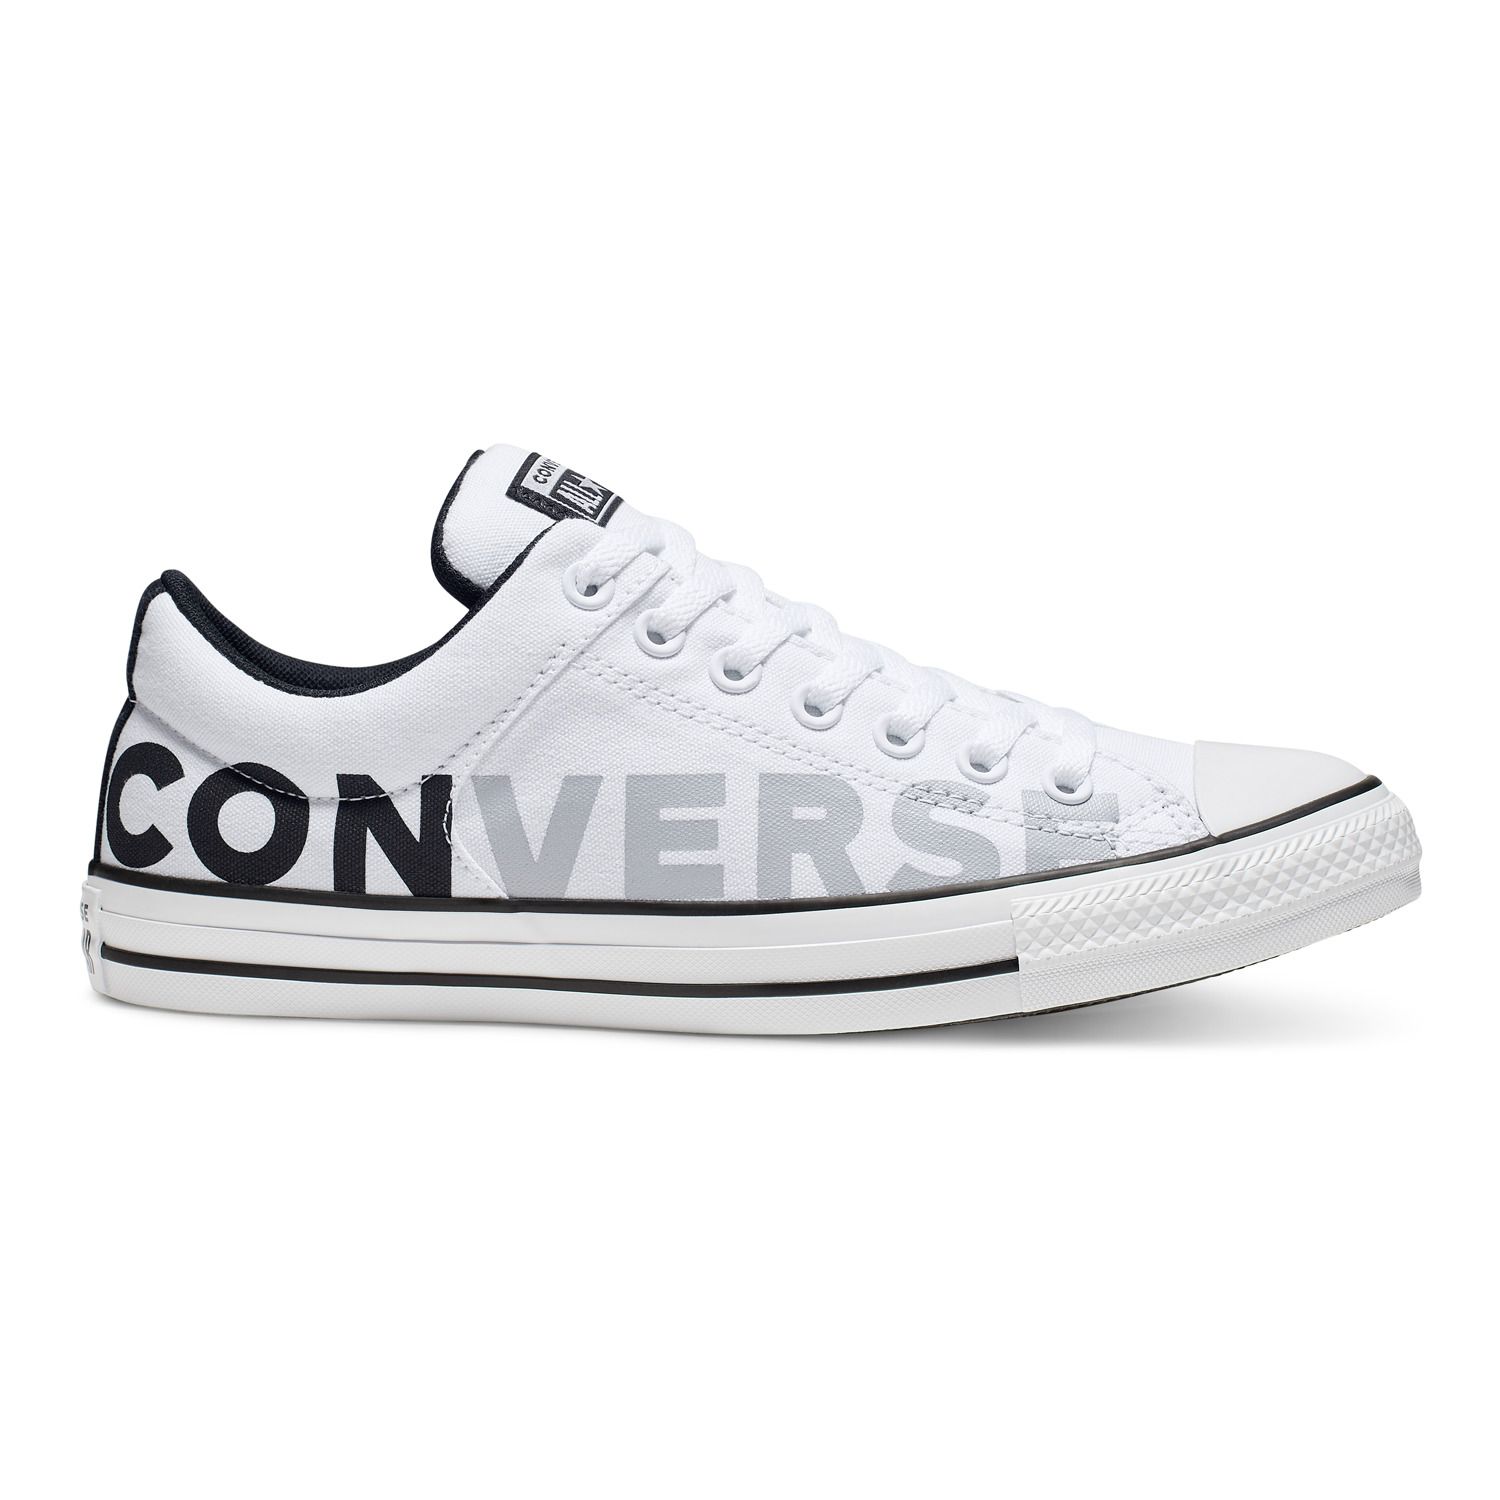 converse chuck taylor all star high wordmark - Online Discount Shop for Electronics, Apparel, Toys, Books, Games, Computers, Shoes, Jewelry, Watches, Baby Products, Sports Outdoors, Office Products, Bed & Bath,